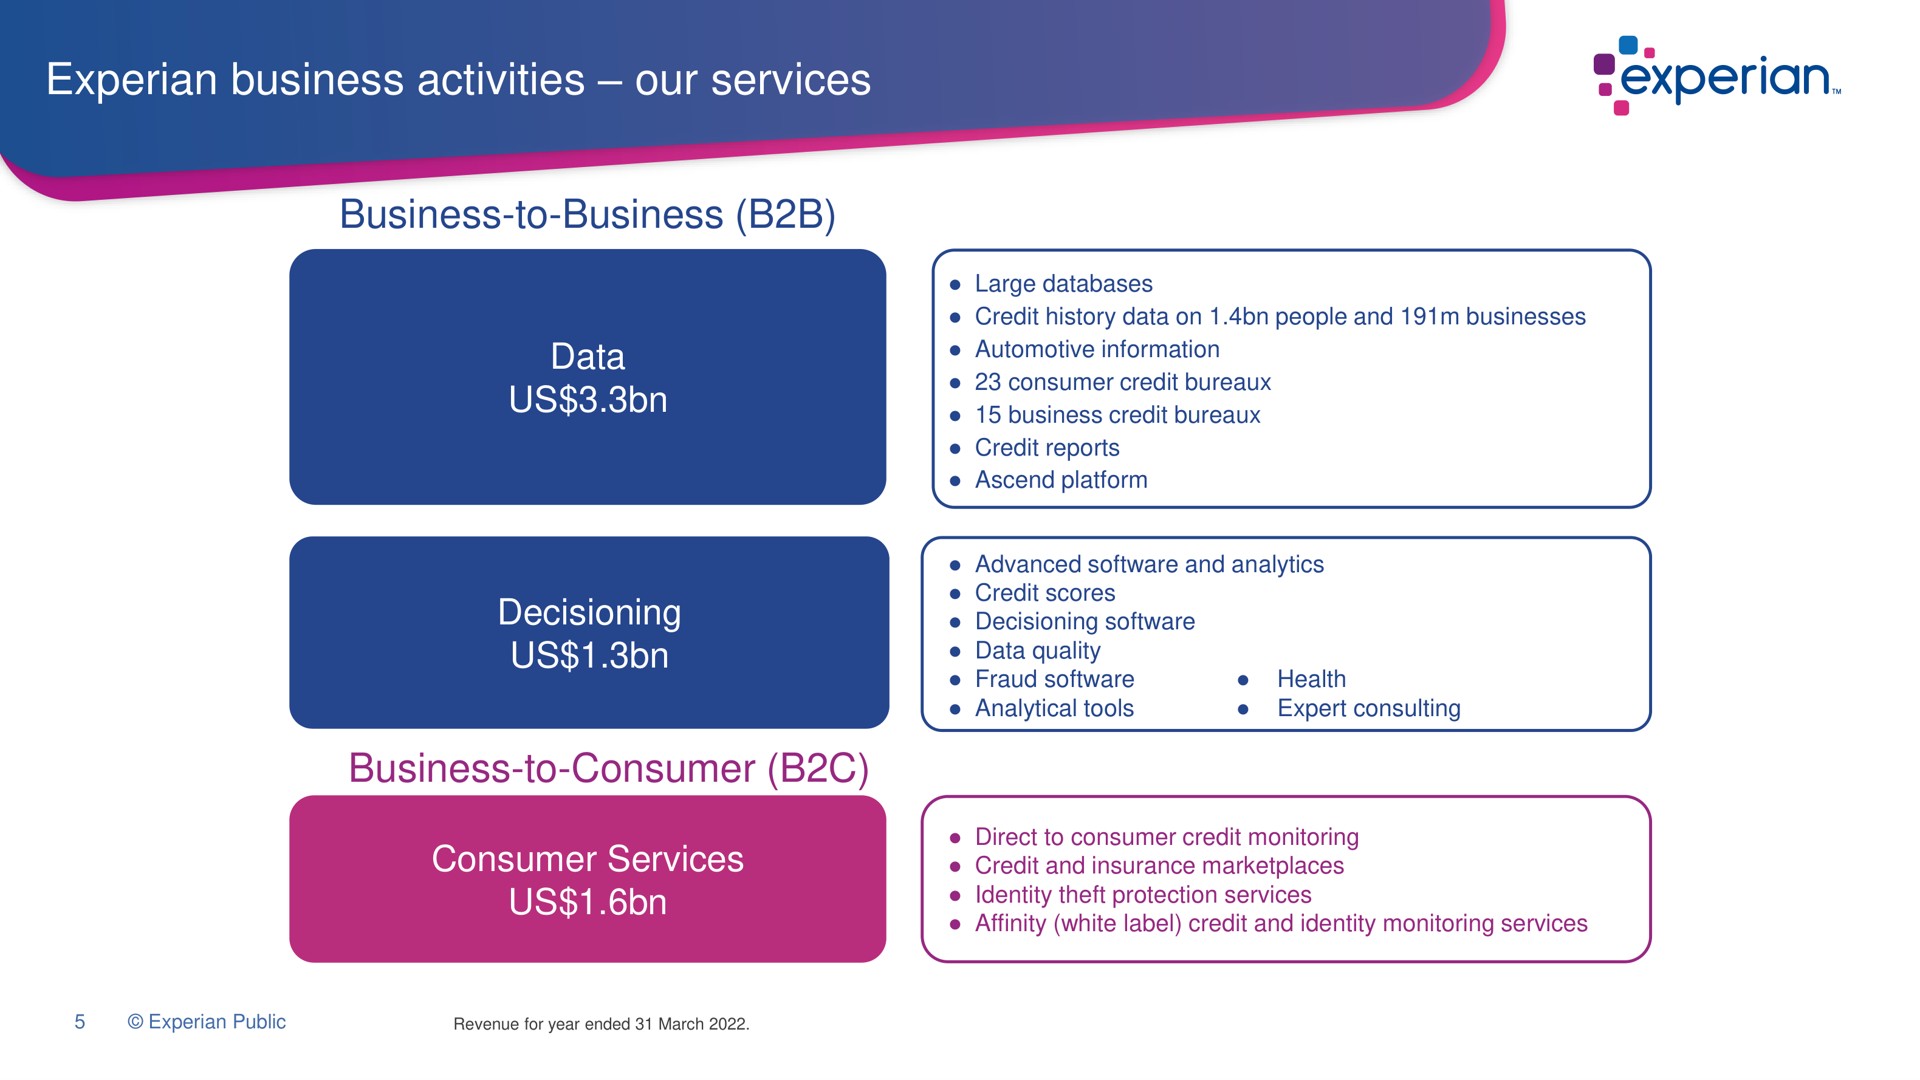 business activities our services business to business data us us business to consumer consumer services us | Experian